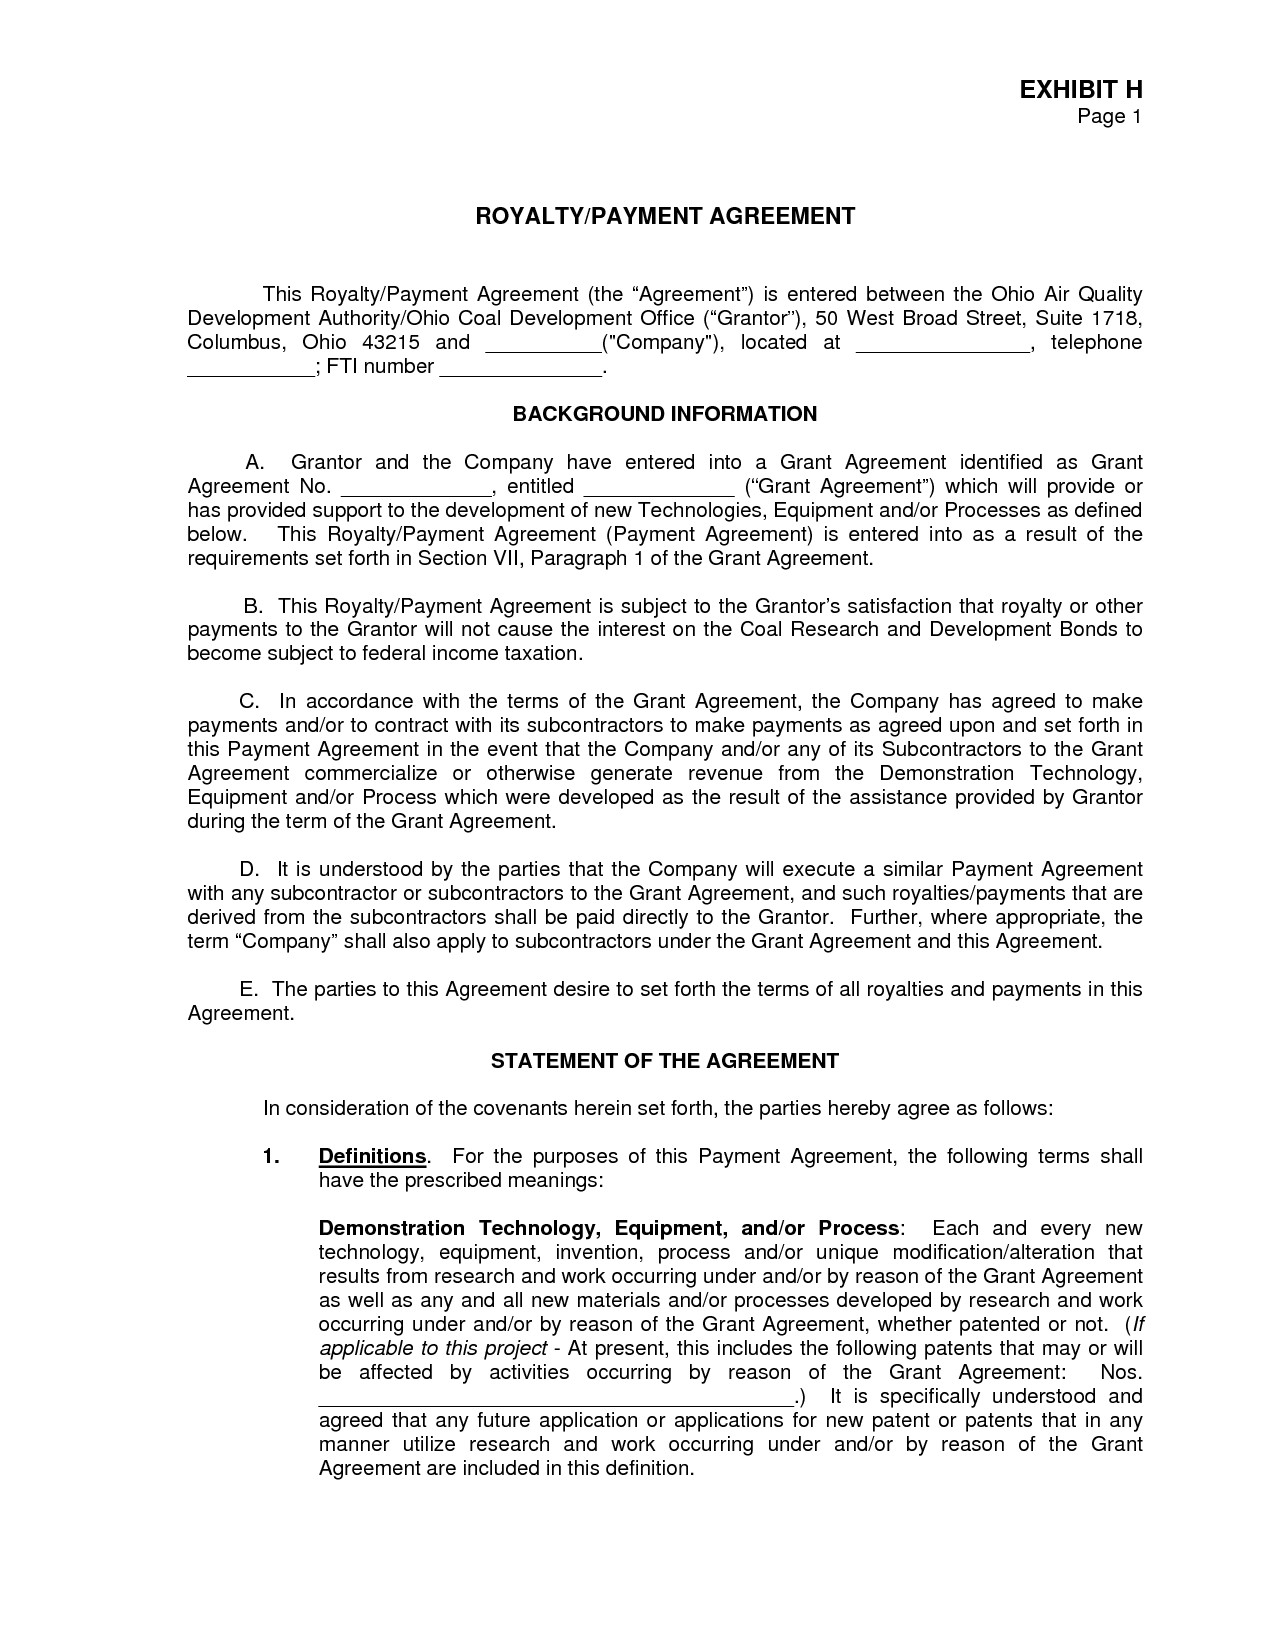 Royalty Agreement PDF By Oly19302 Contract Financing Template